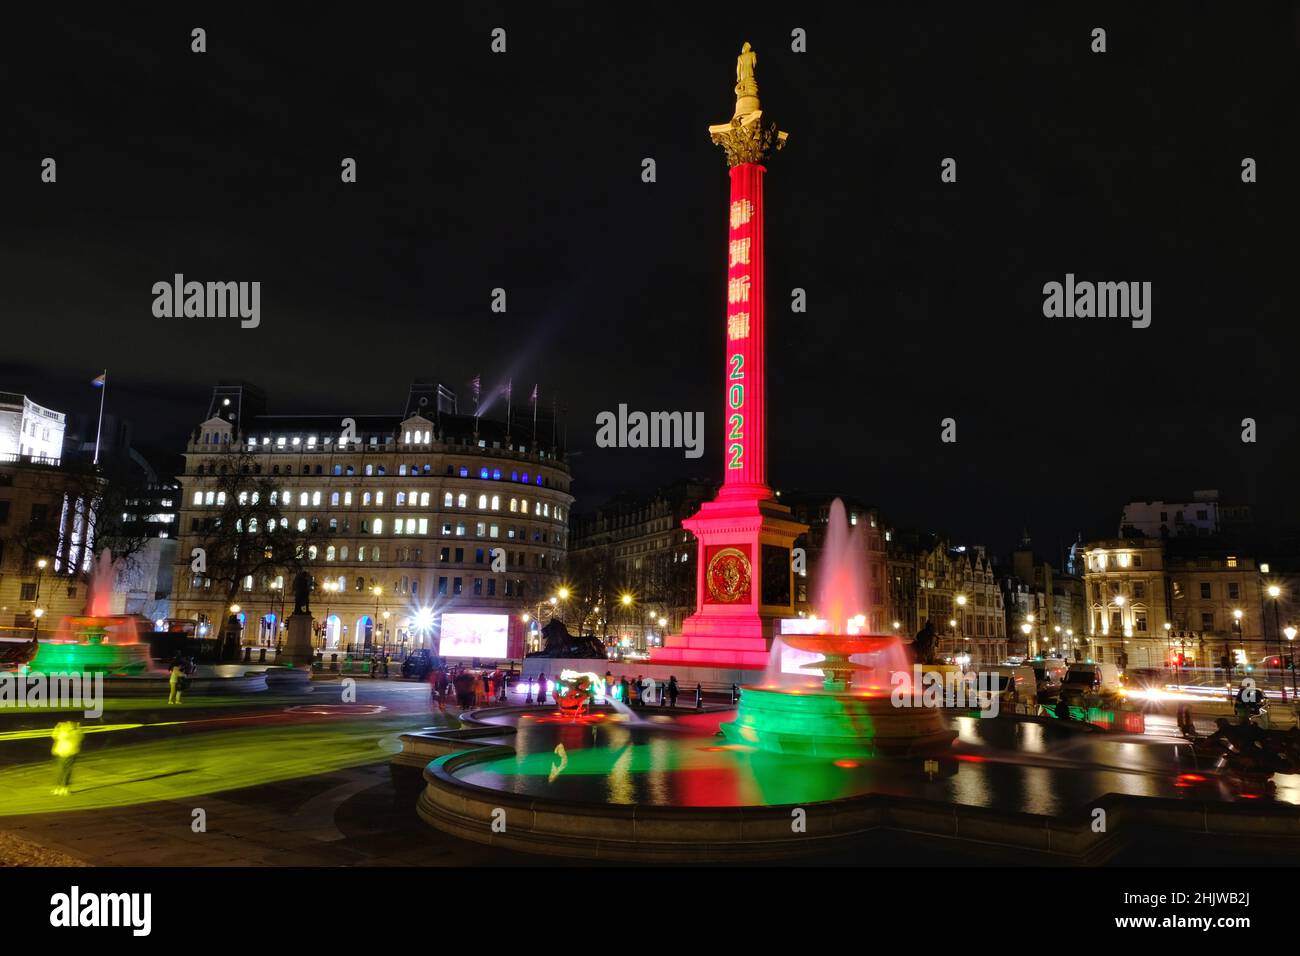 London, UK, 31st Jan, 2022.  Nelson's Column and Trafalgar Square is lit-up to celebrate Chinese New Year which falls on February 1st and ushers in the Year of the Tiger.  A lion and dragon dance was performed mainly for dignataries and officials as planned public celebrations were scaled back this year.  Credit: Eleventh Hour Photography/Alamy Live News Stock Photo